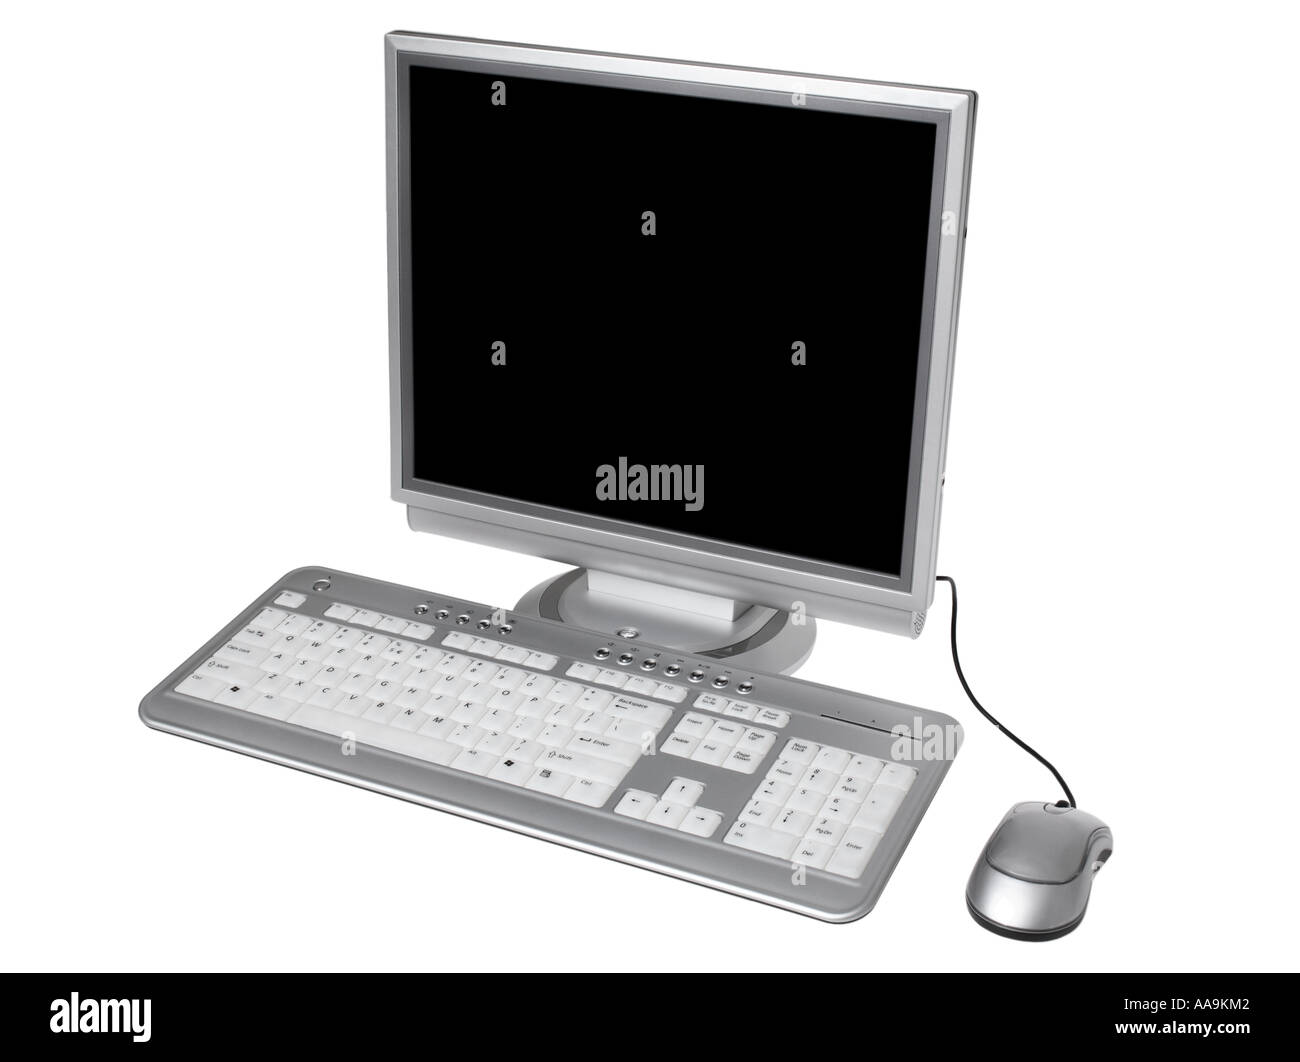 Computer with keyboard, mouse and flat panel lcd screen. Stock Photo